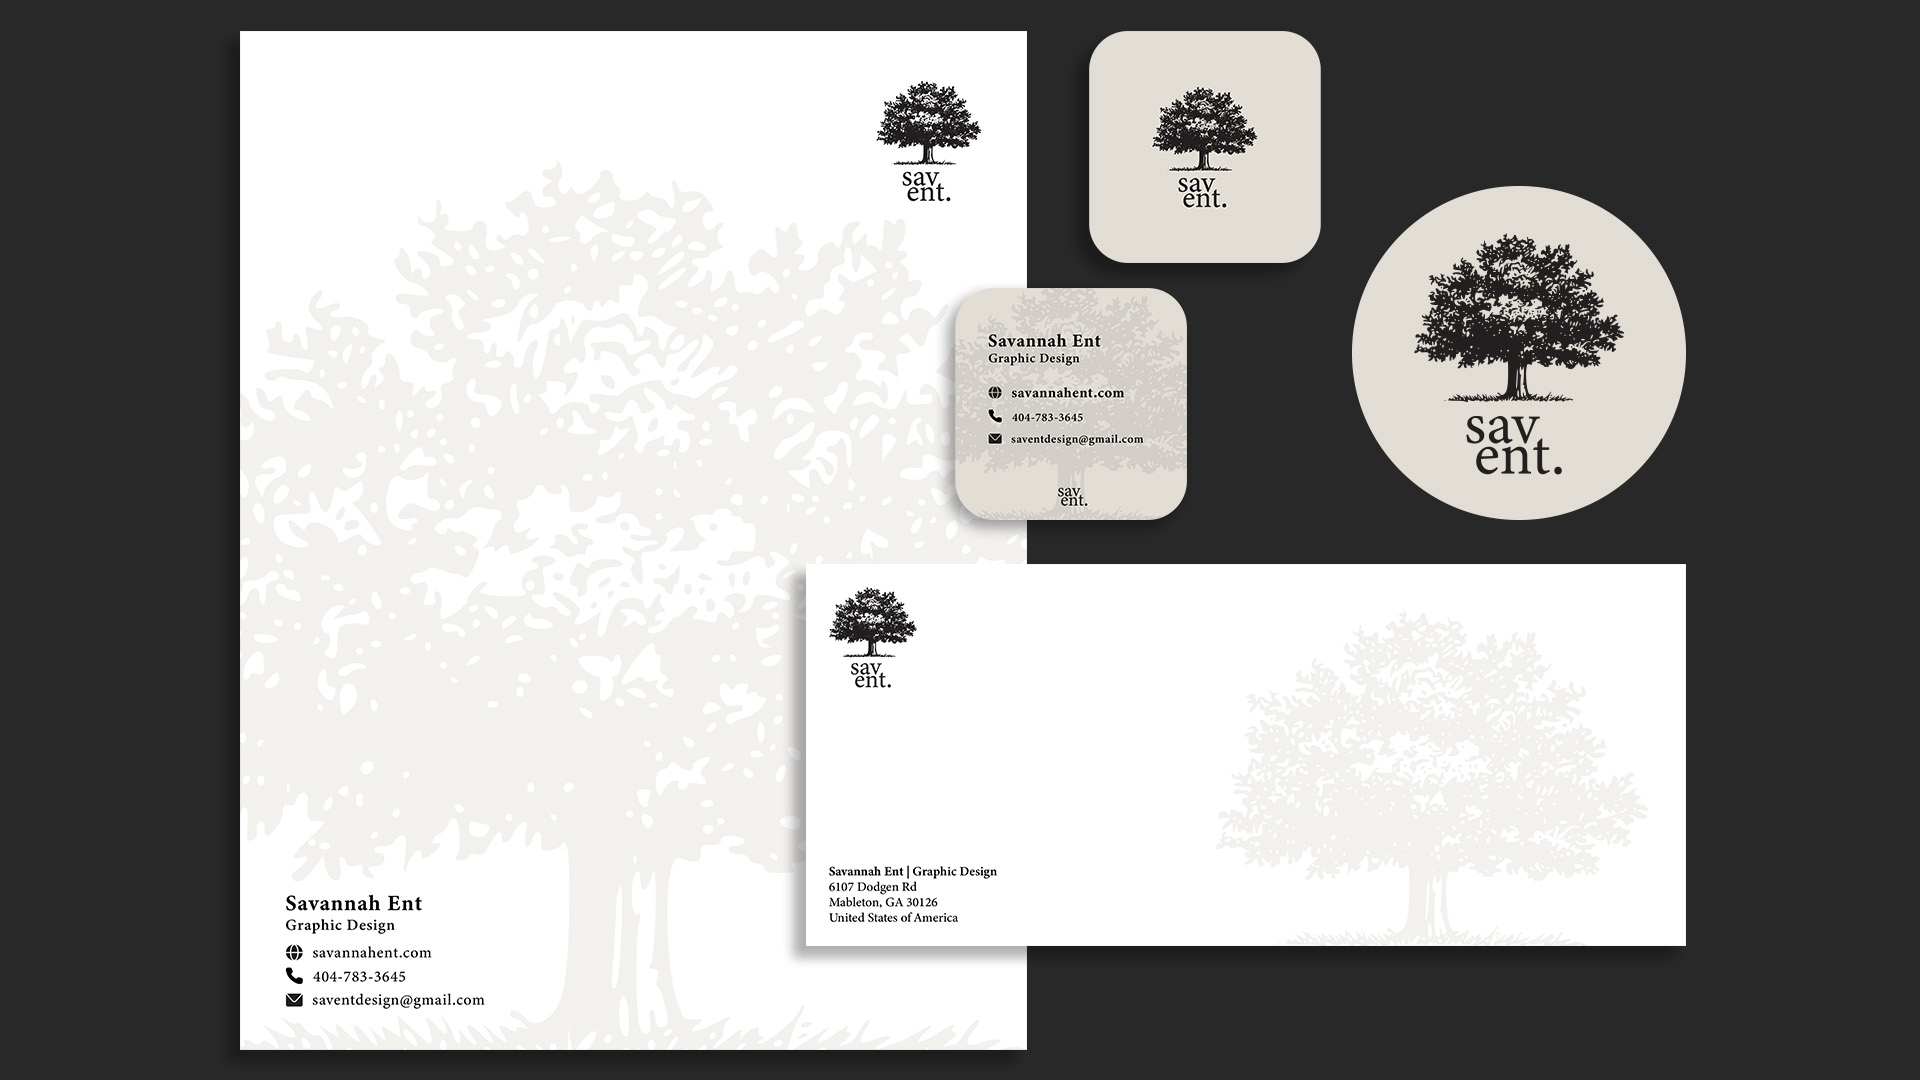 “Stationary Corporate" / “Stationary Corporate ID, print size varies, 2023. This stationary includes a personalized logo, letterhead, envelope, and business card.